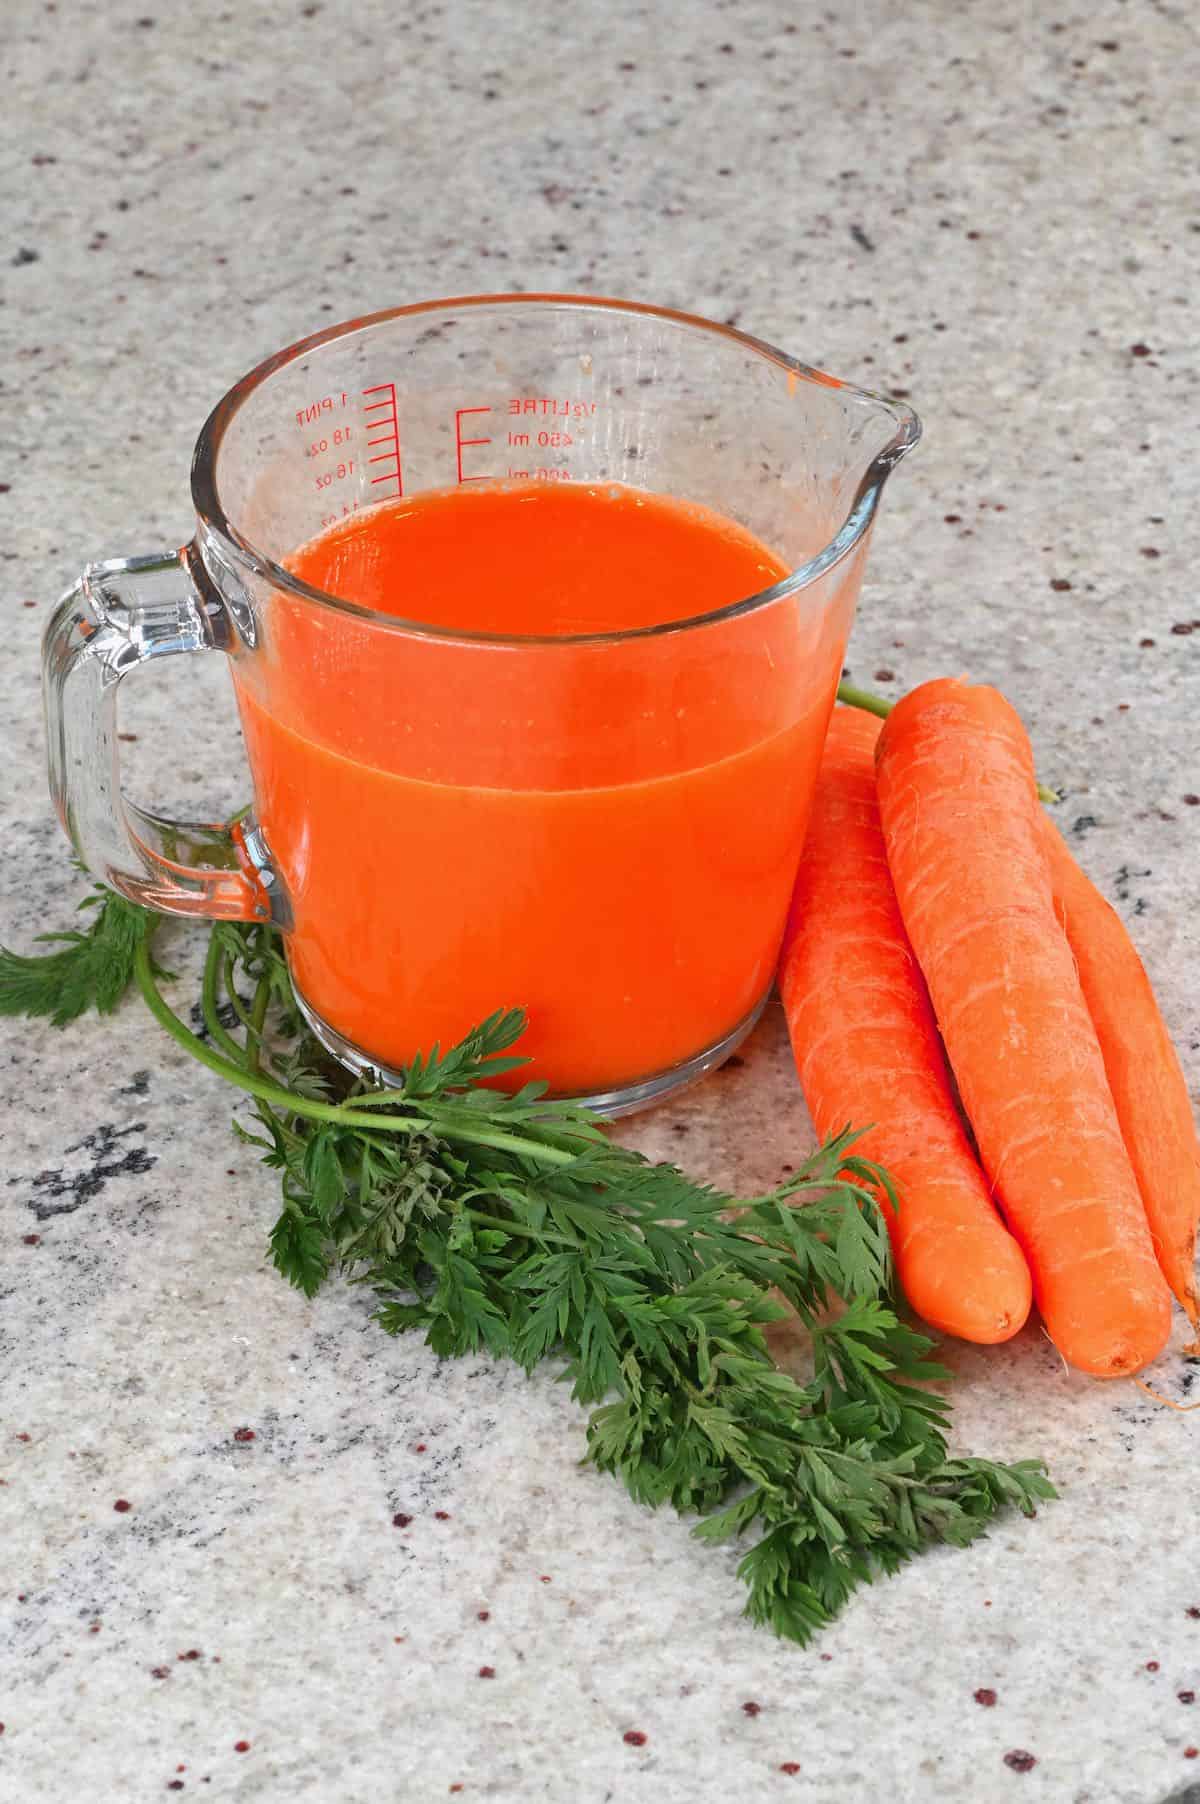 Carrot juice in a measuring cup with some carrots next to it